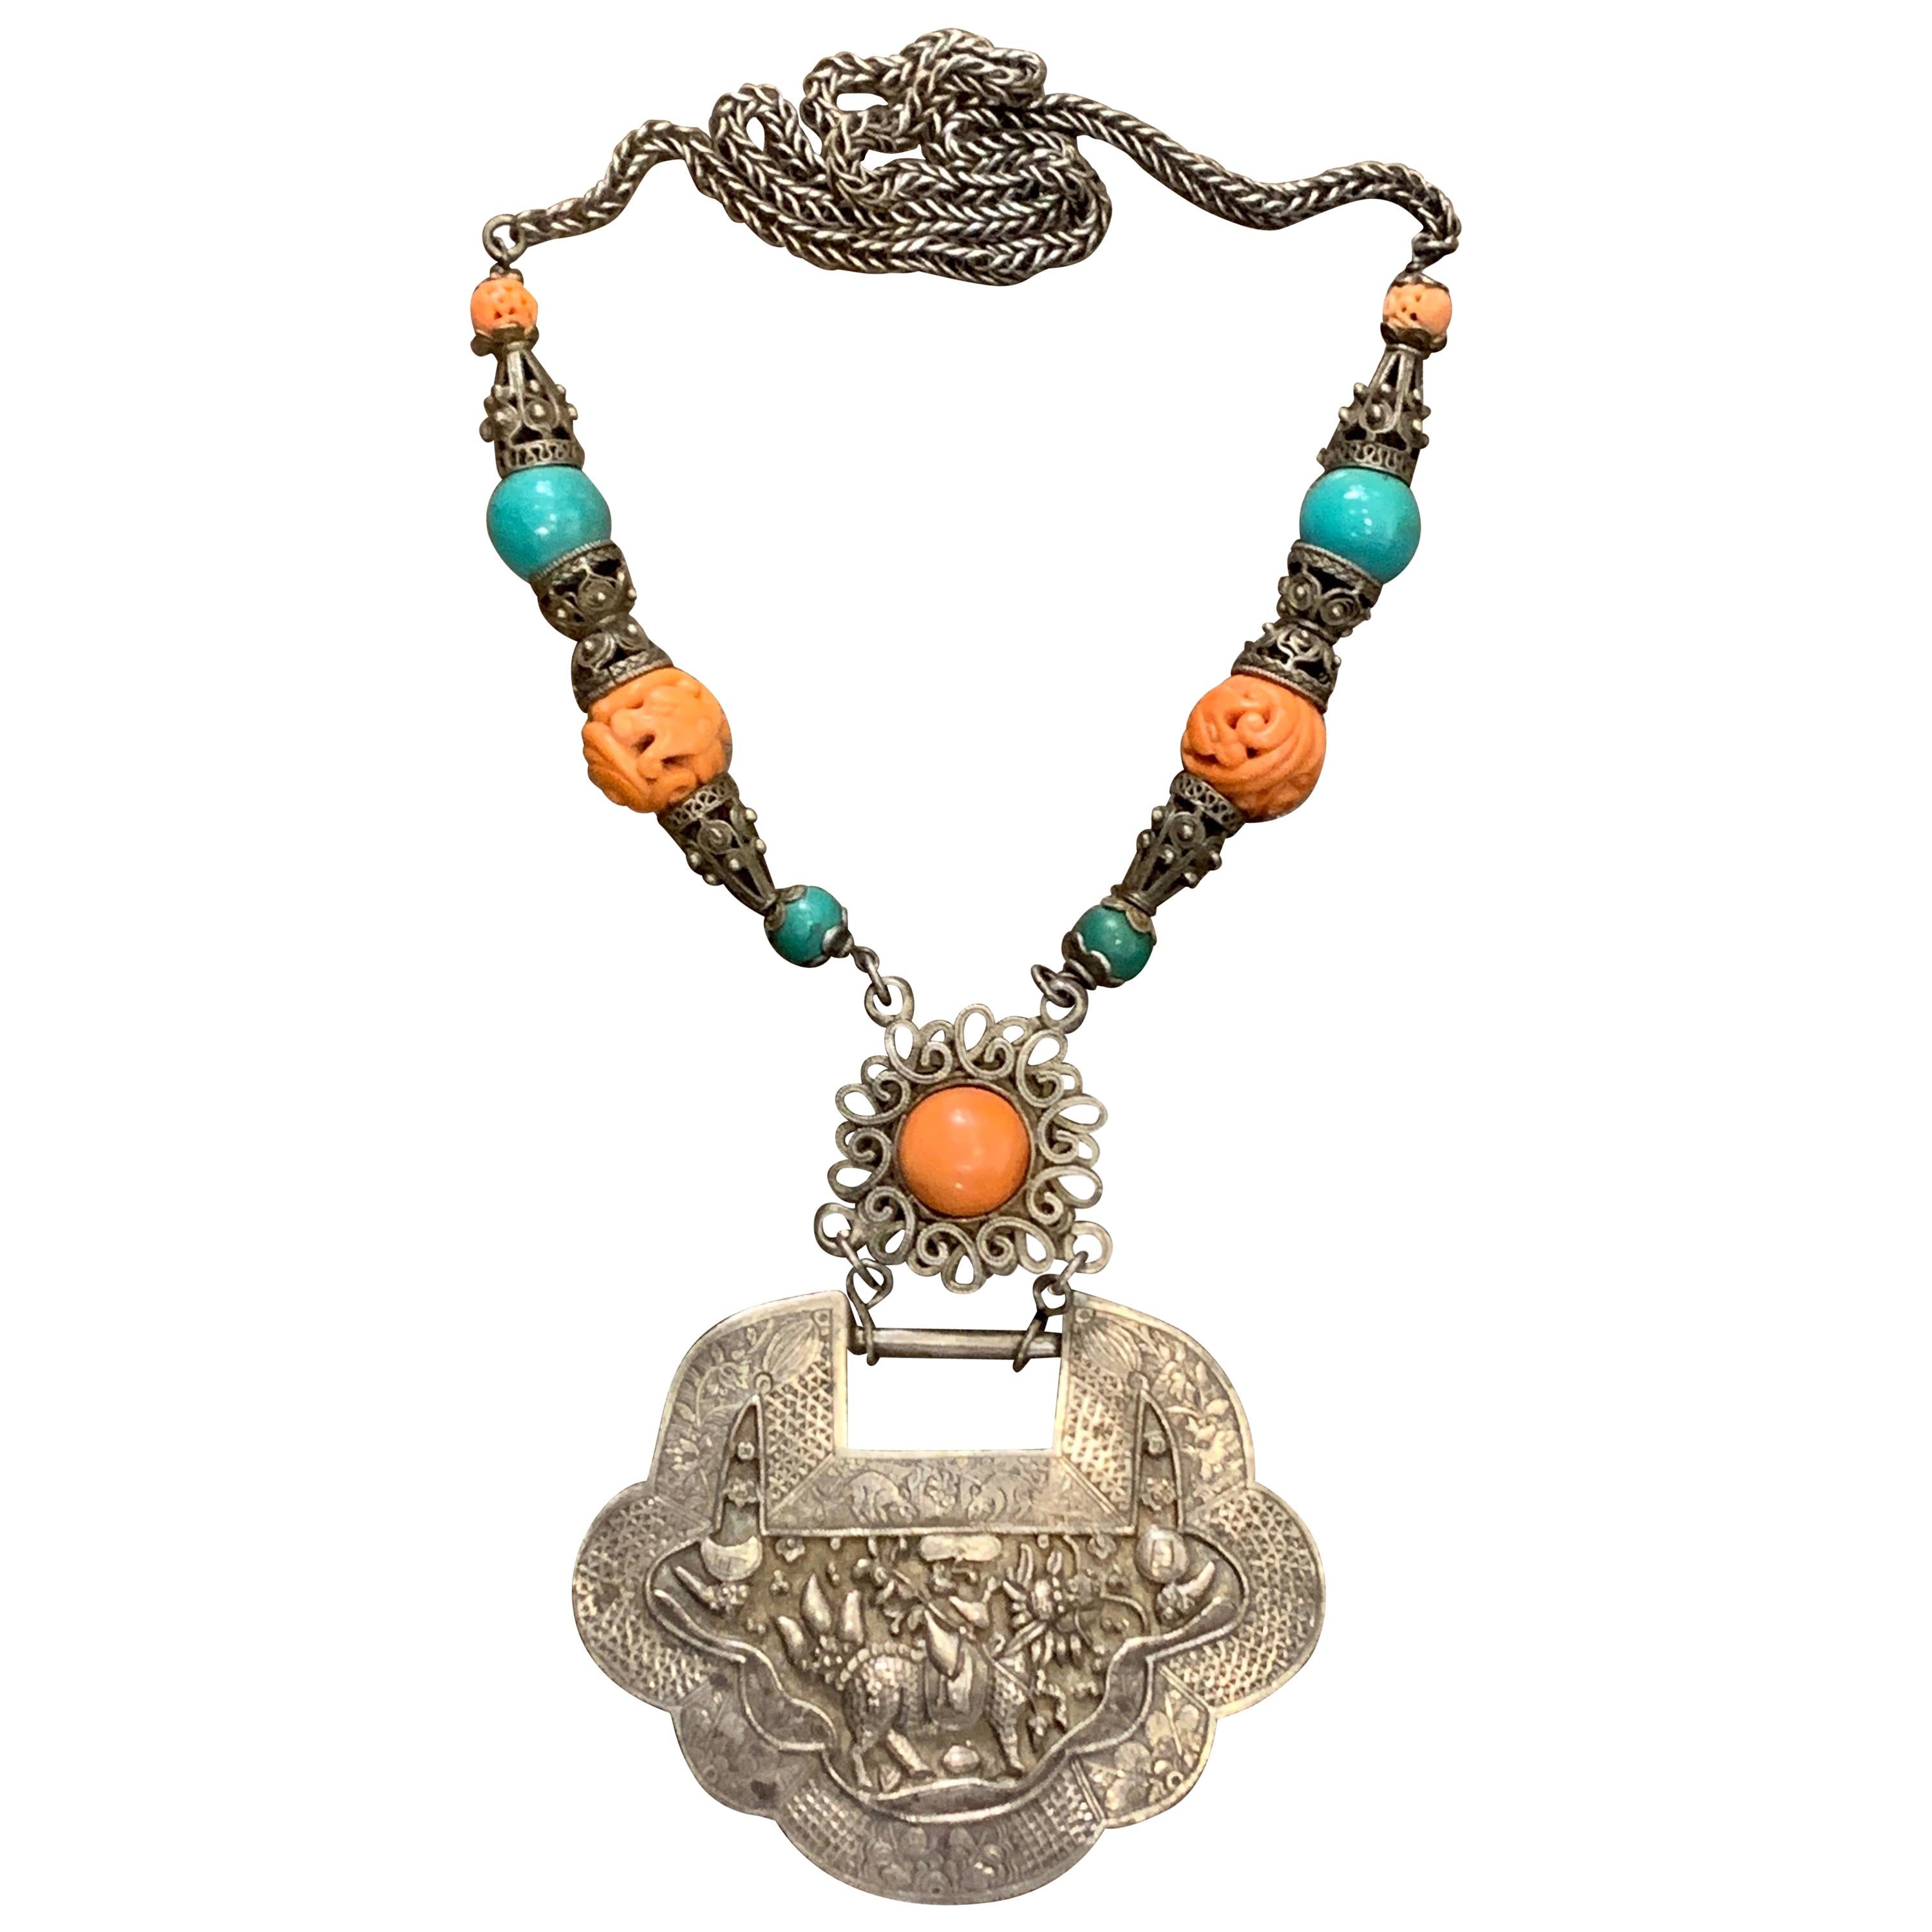 Large Mongolian Silver, Coral, Turquoise Lock Charm Necklace, Early 20th Century